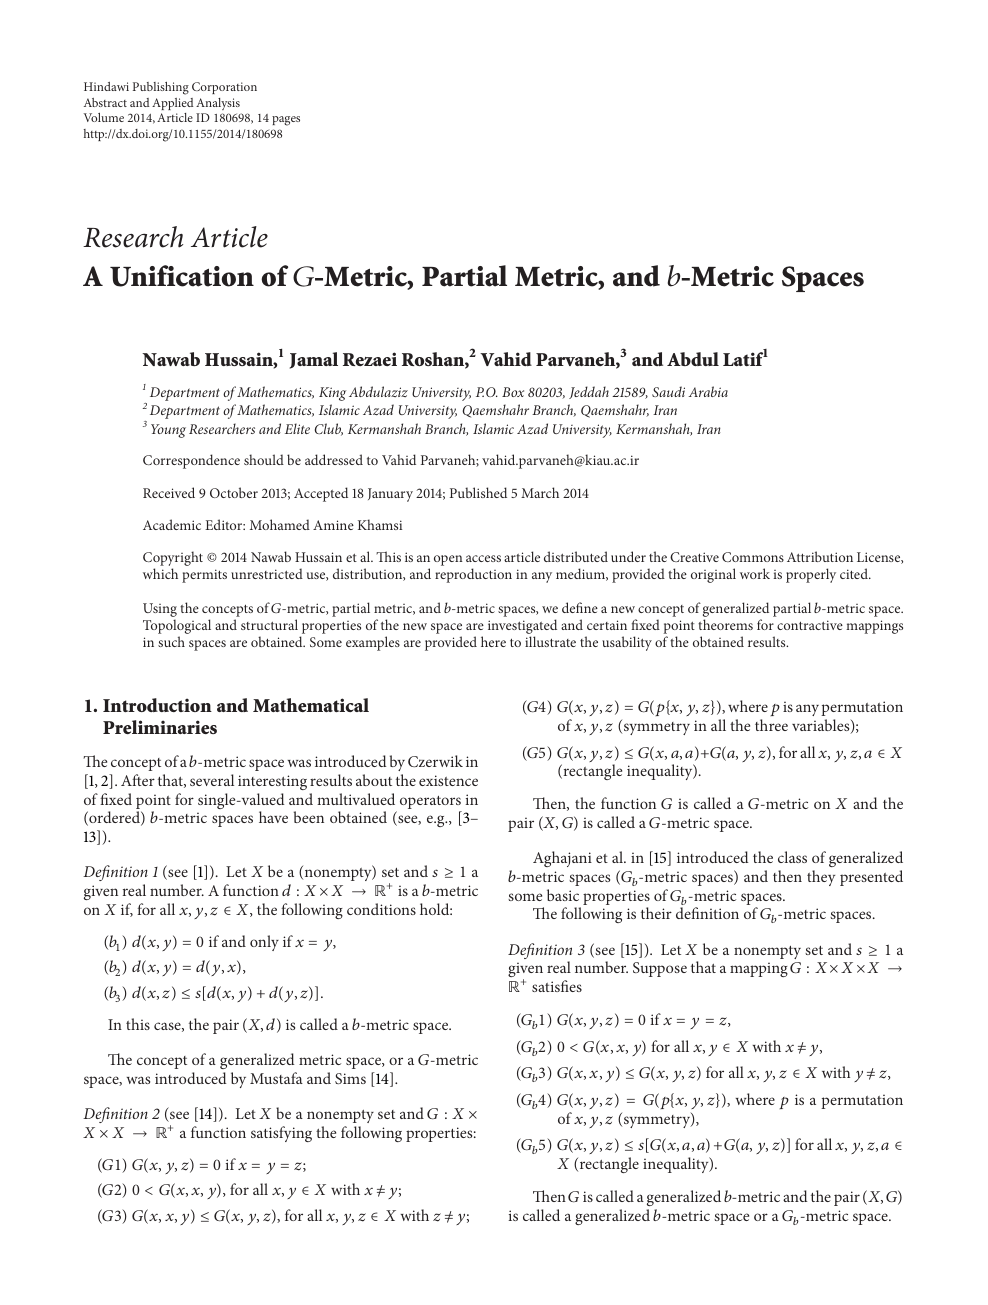 A Unification Of Metric Partial Metric And Metric Spaces Topic Of Research Paper In Mathematics Download Scholarly Article Pdf And Read For Free On Cyberleninka Open Science Hub